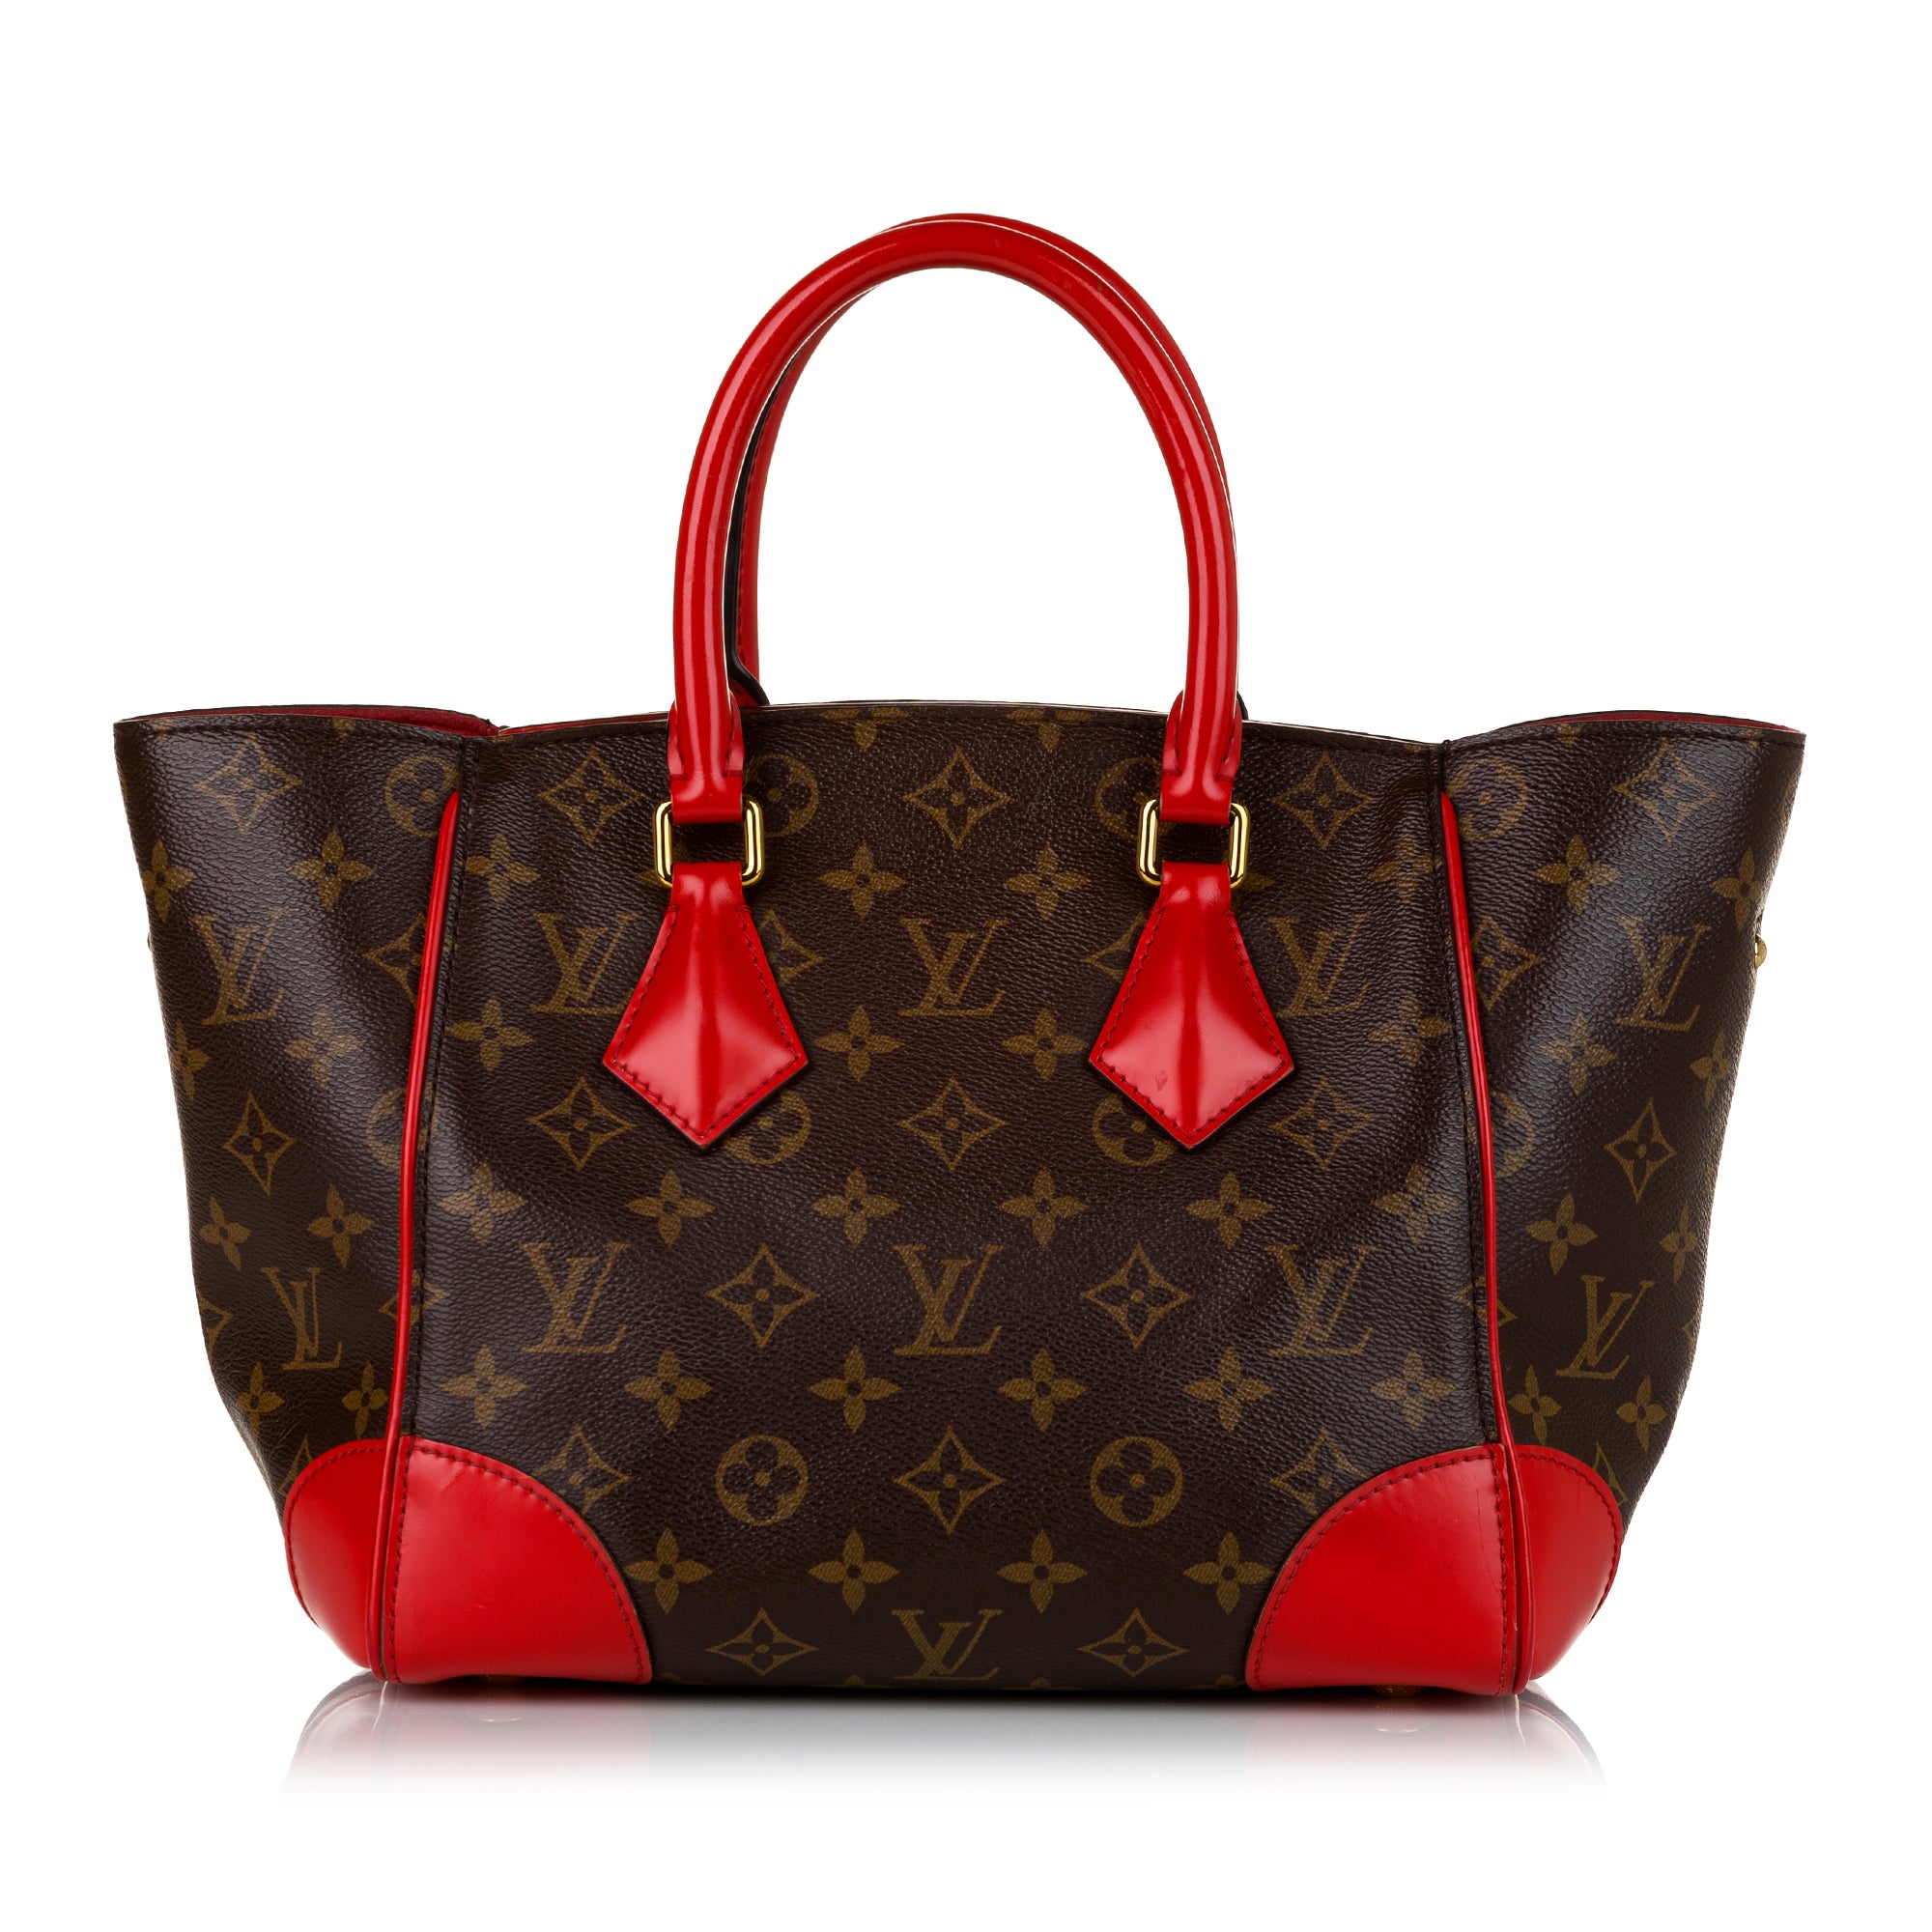 Louis Vuitton Danube x Supreme Shoulder Bag in Red and White Epi